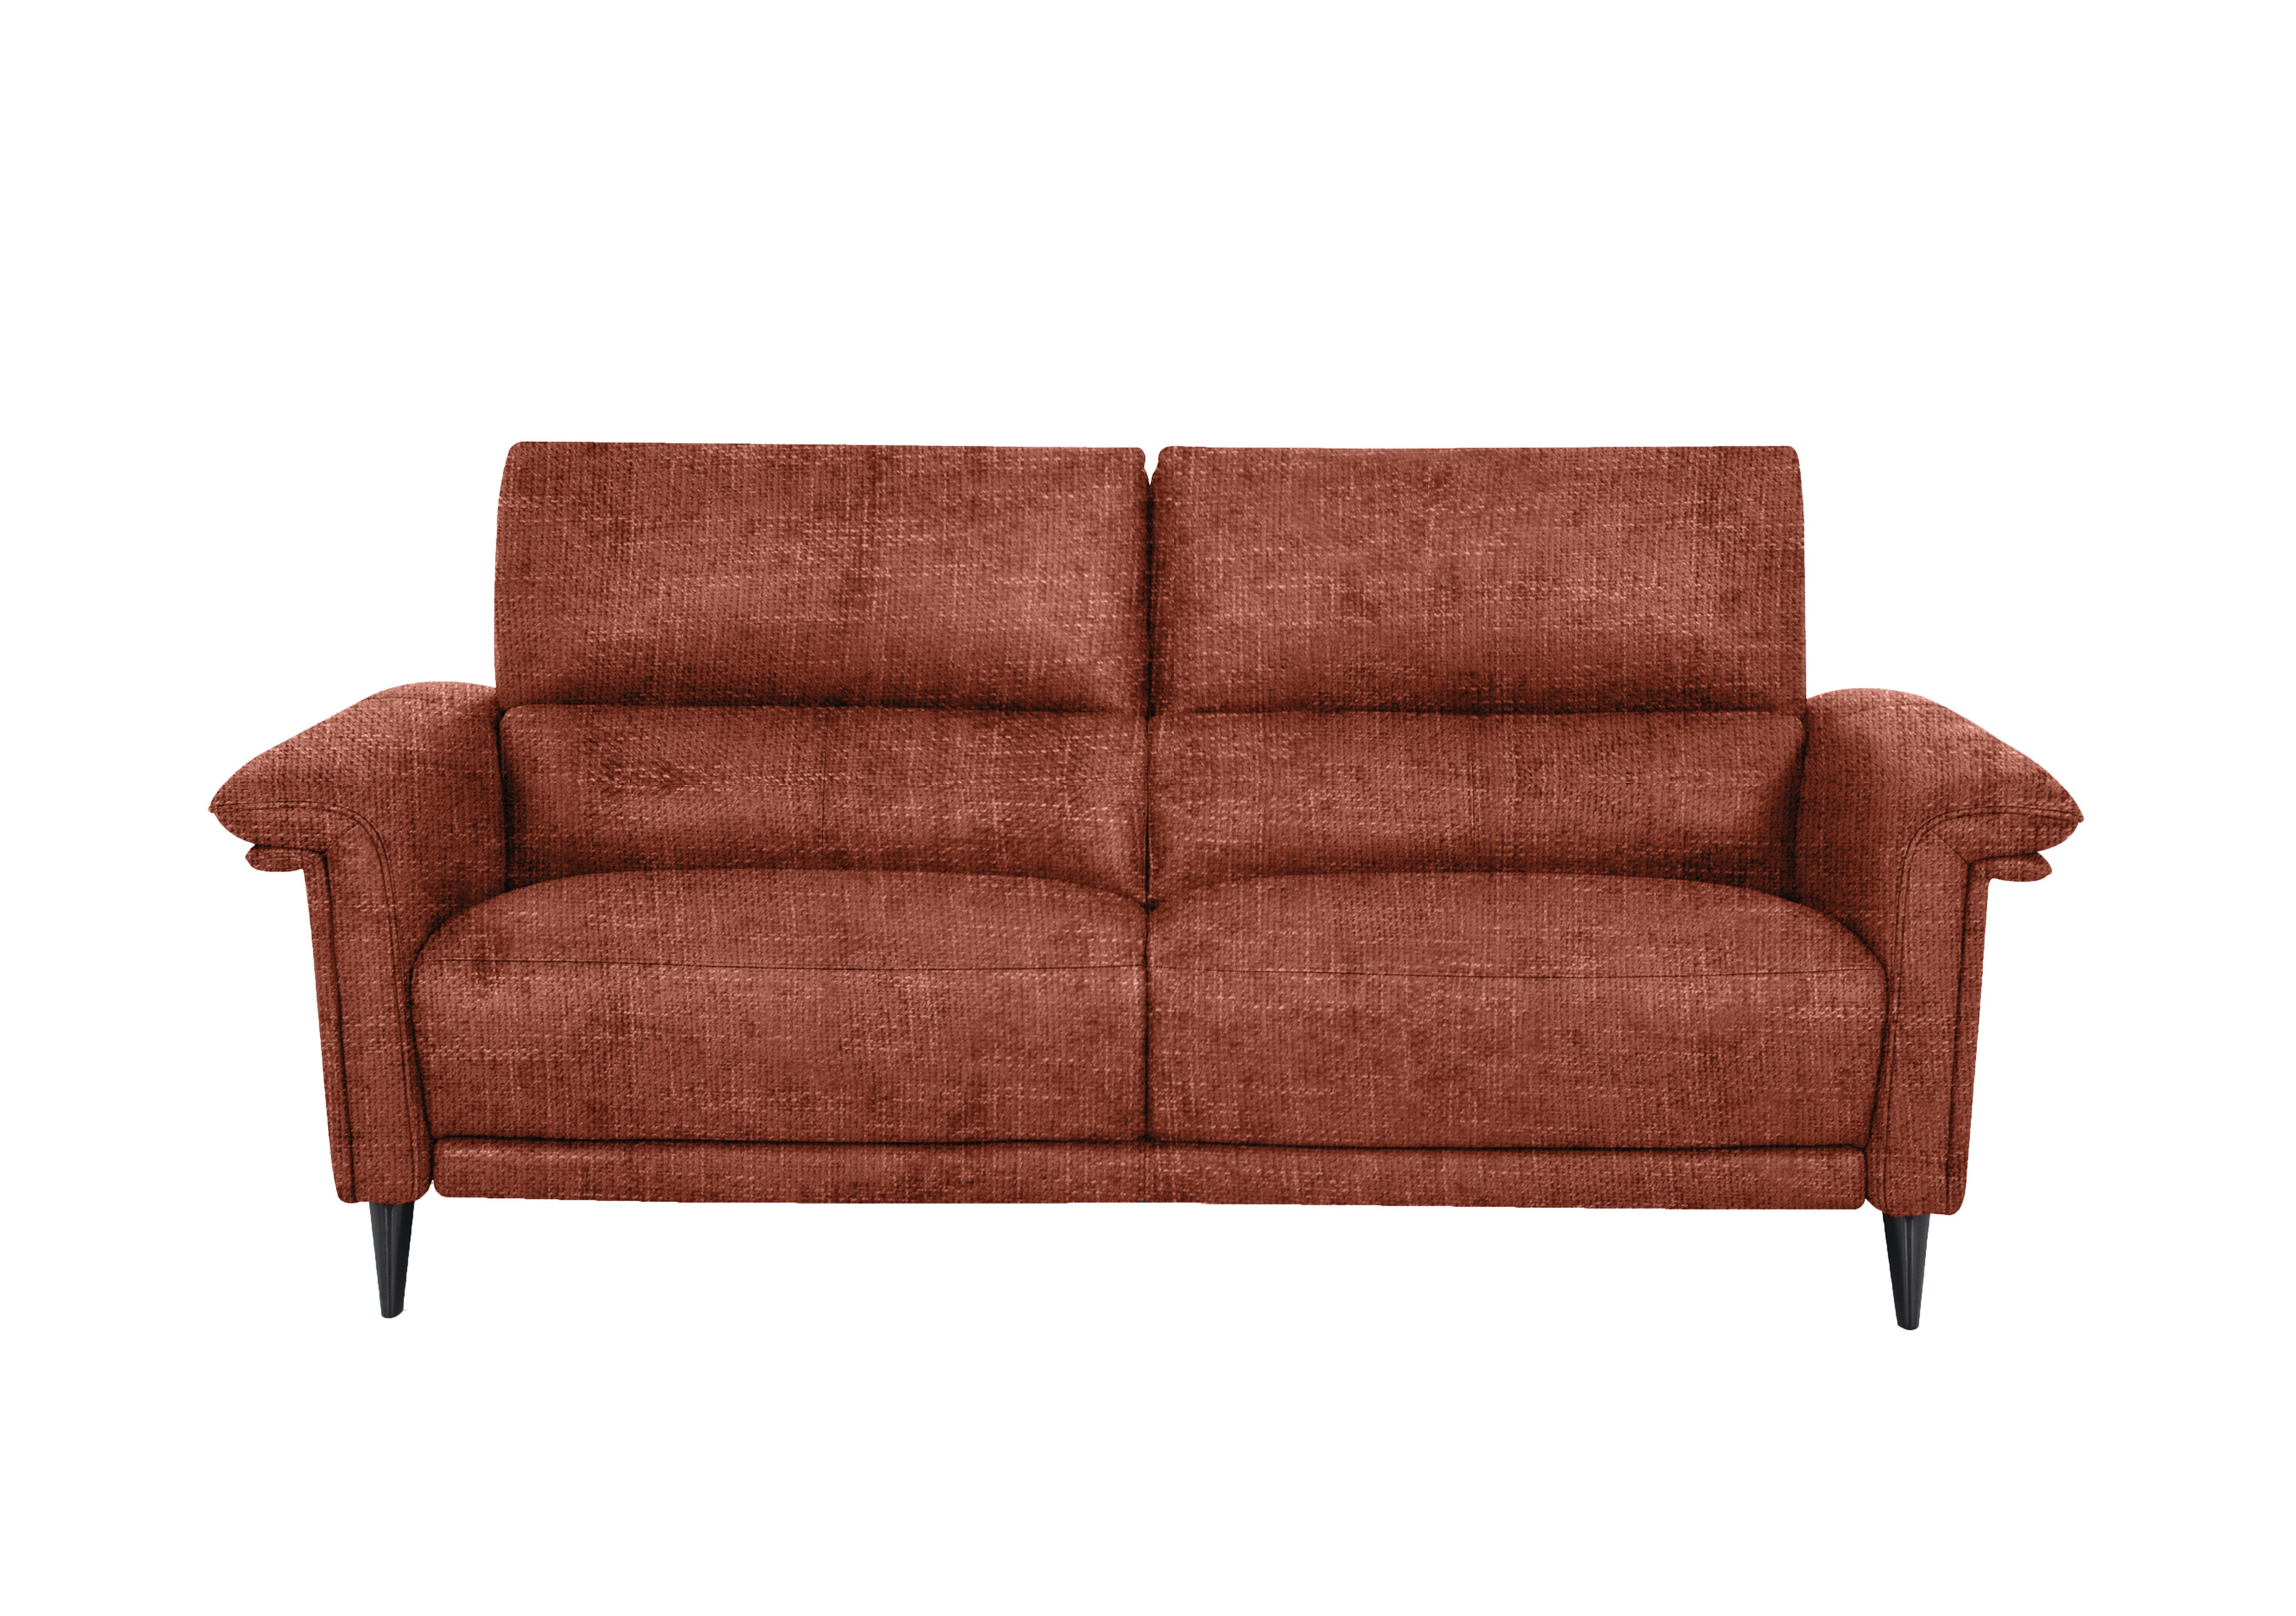 Huxley 3 Seater Fabric Sofa in Fab-Cac-R210 Red Maple on Furniture Village